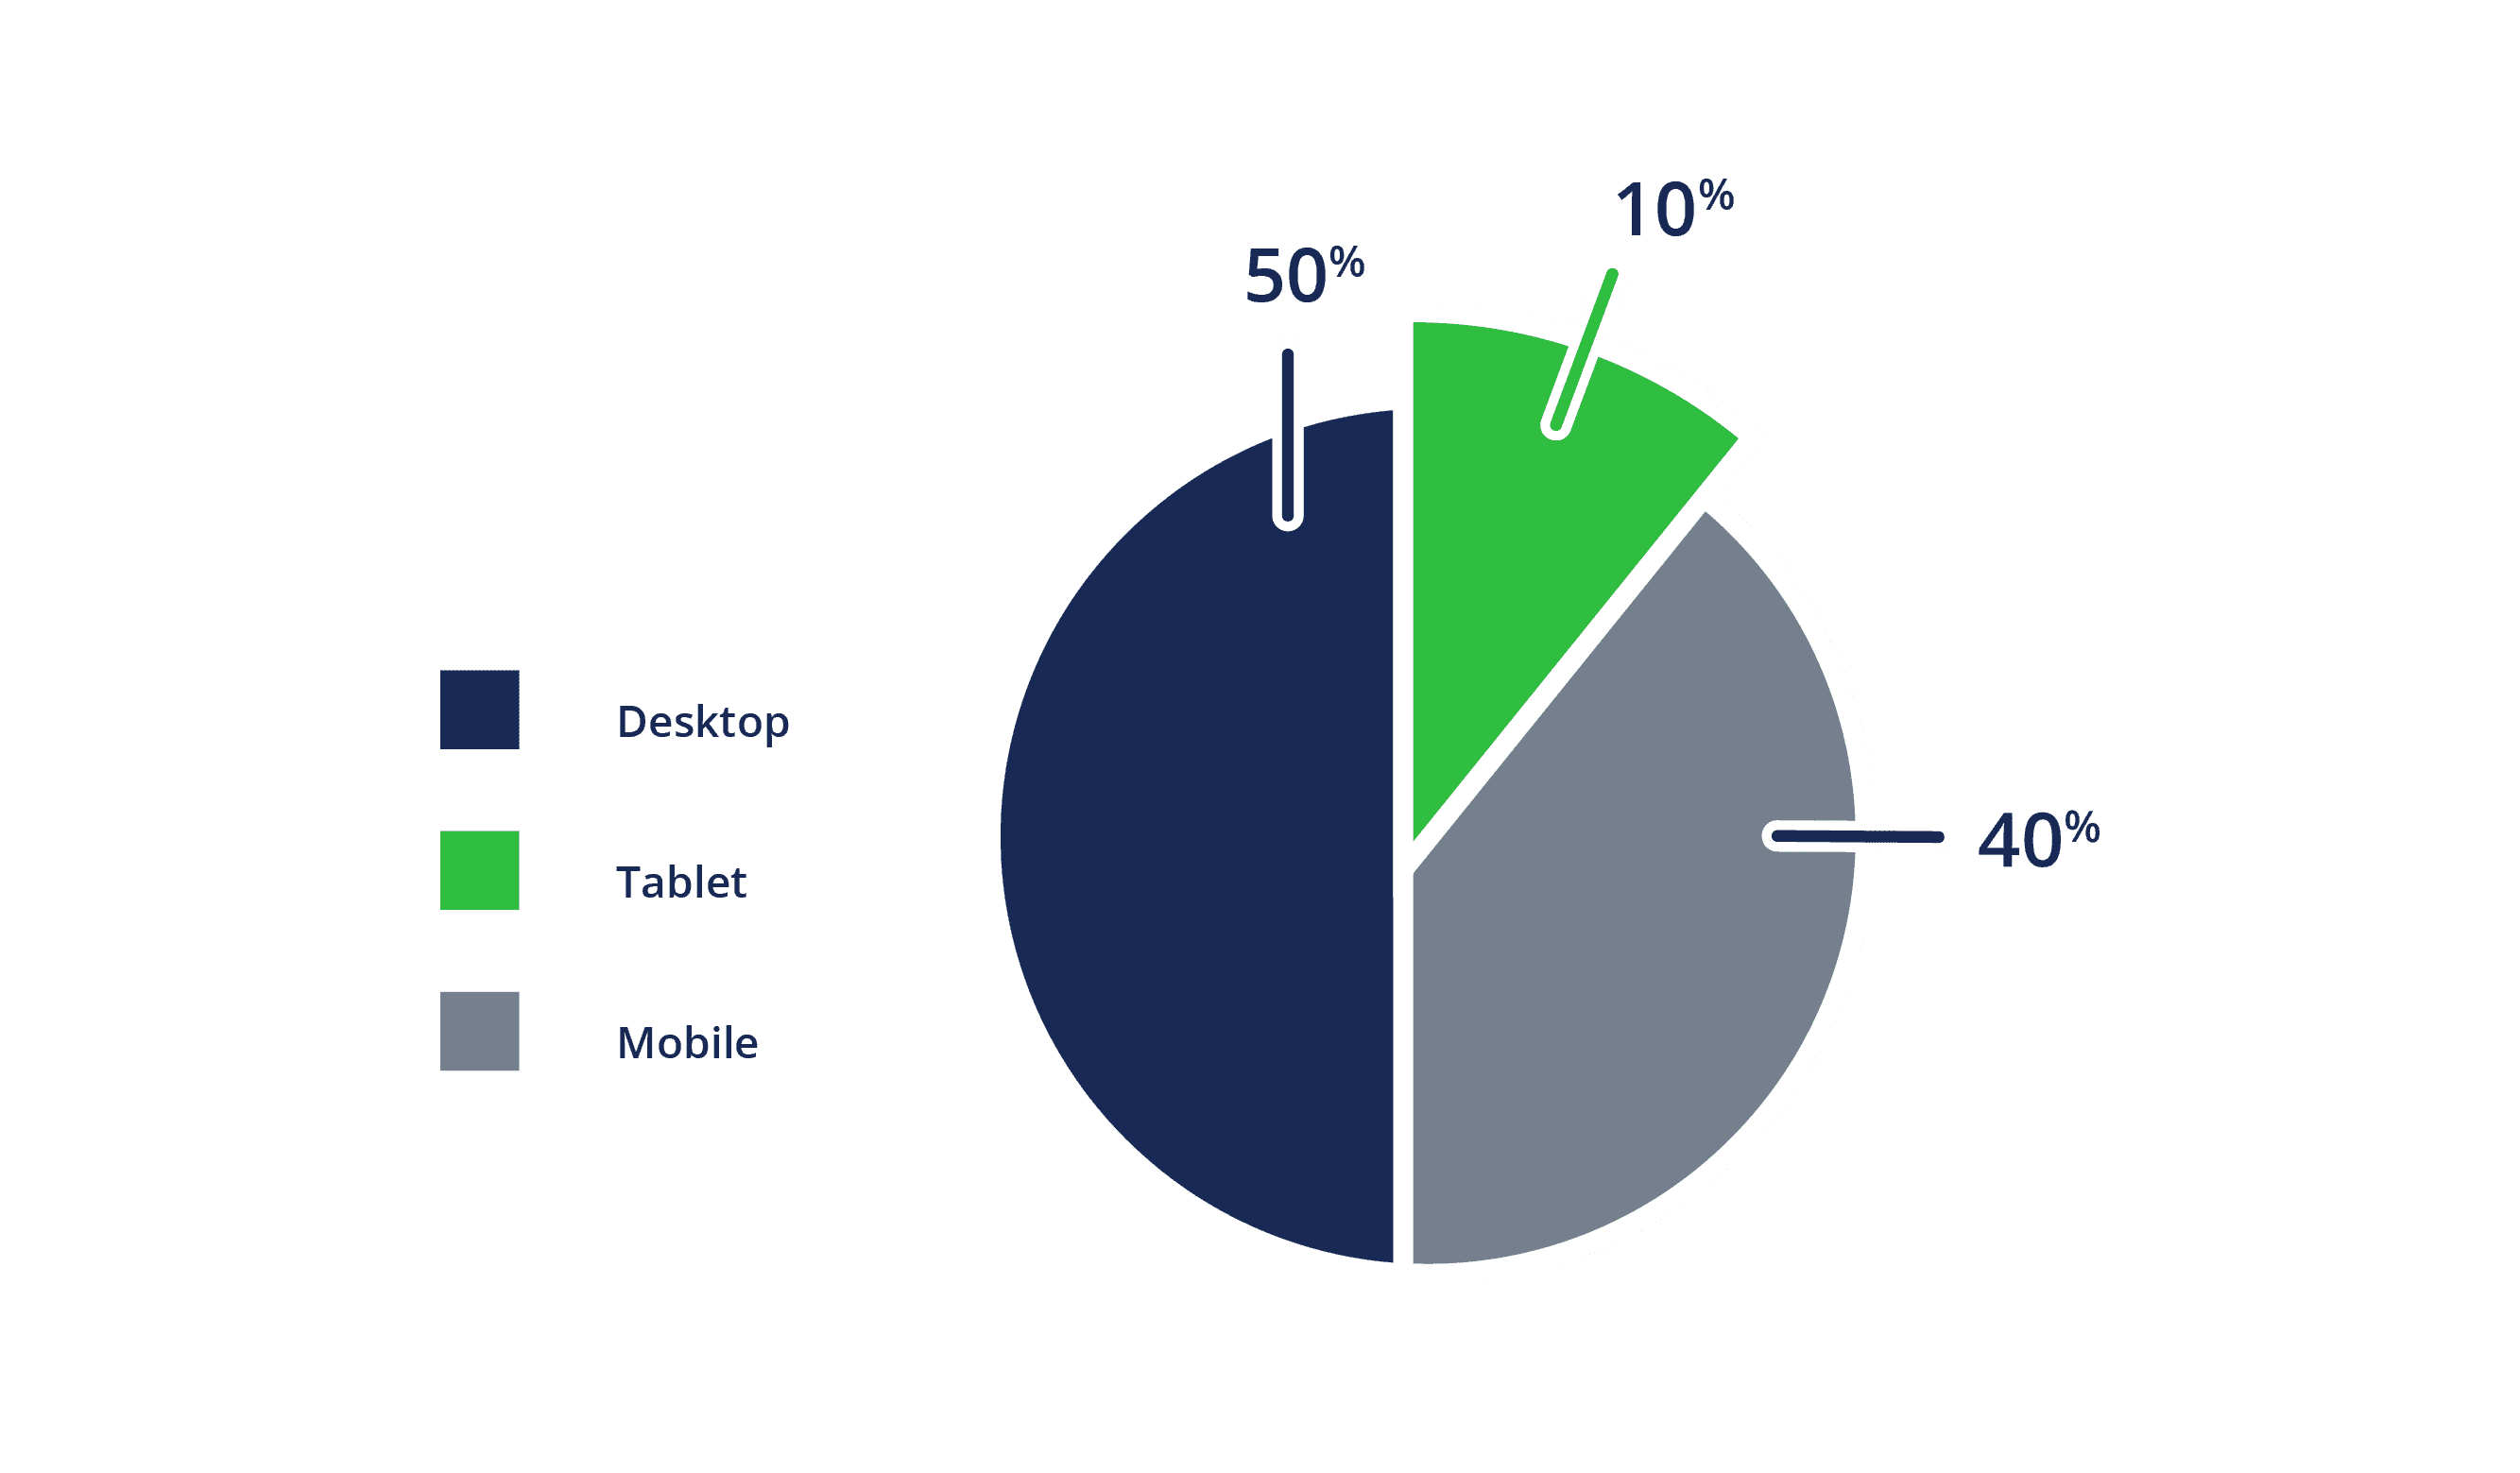 Pie chart showing Desktop 50%, tablet 10% and mobile device 40% in green blue and grey.